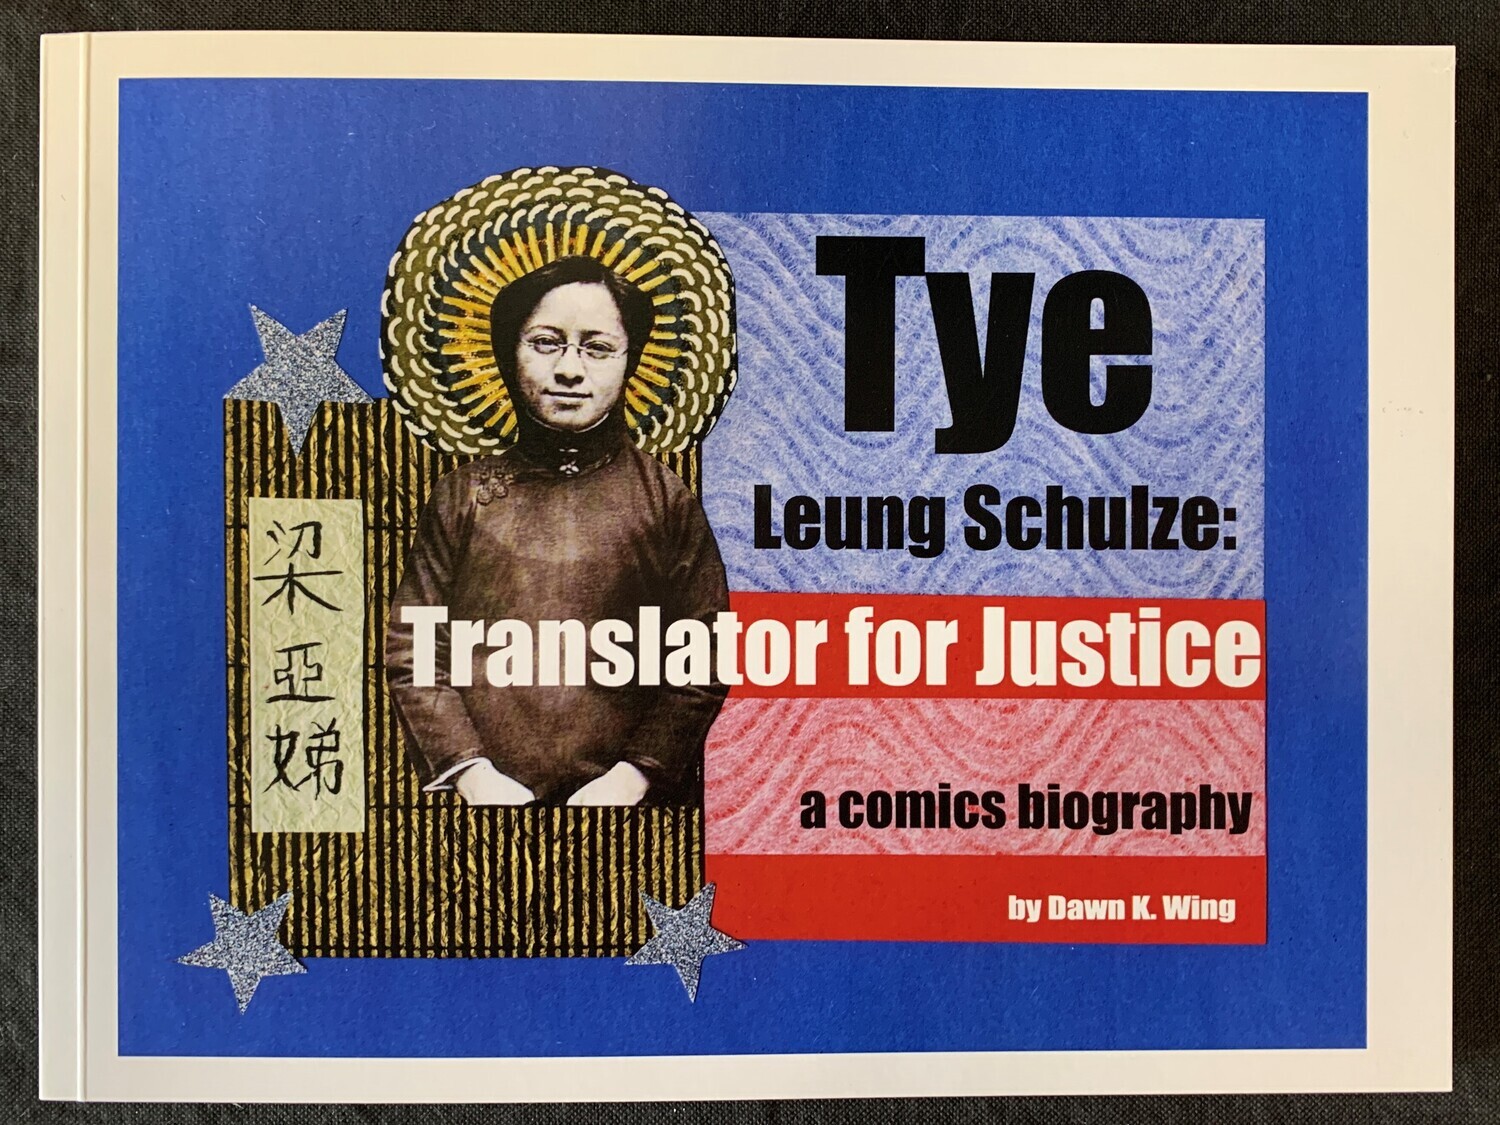 Tye Leung Schulze: Translator for Justice - Biographical Comic by Dawn K. Wing